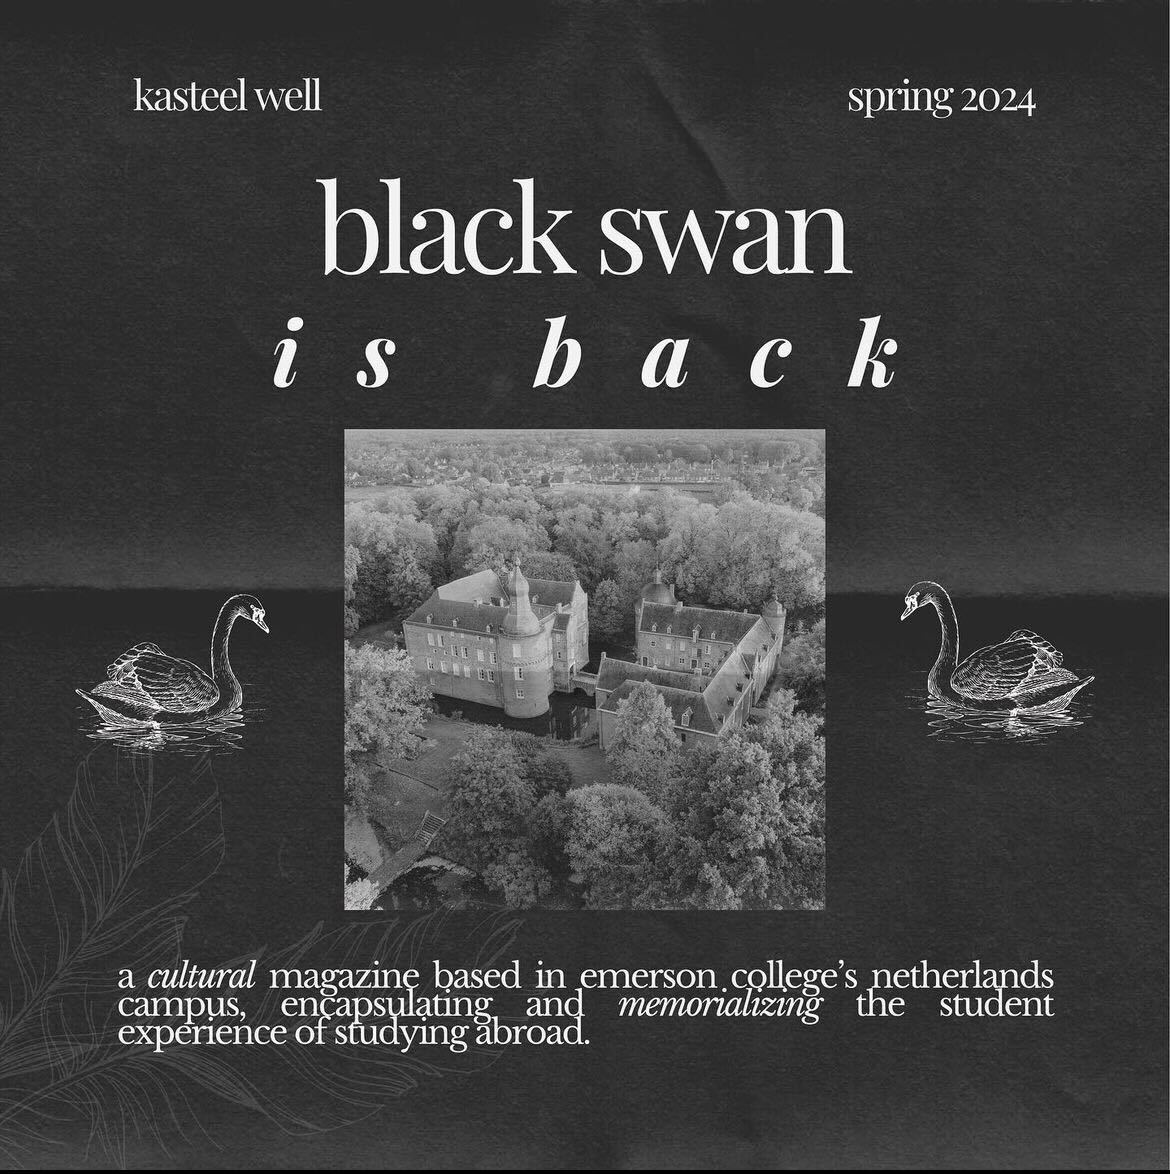 An Instagram post announcing the return of Black Swan for the Spring 2024 semester.